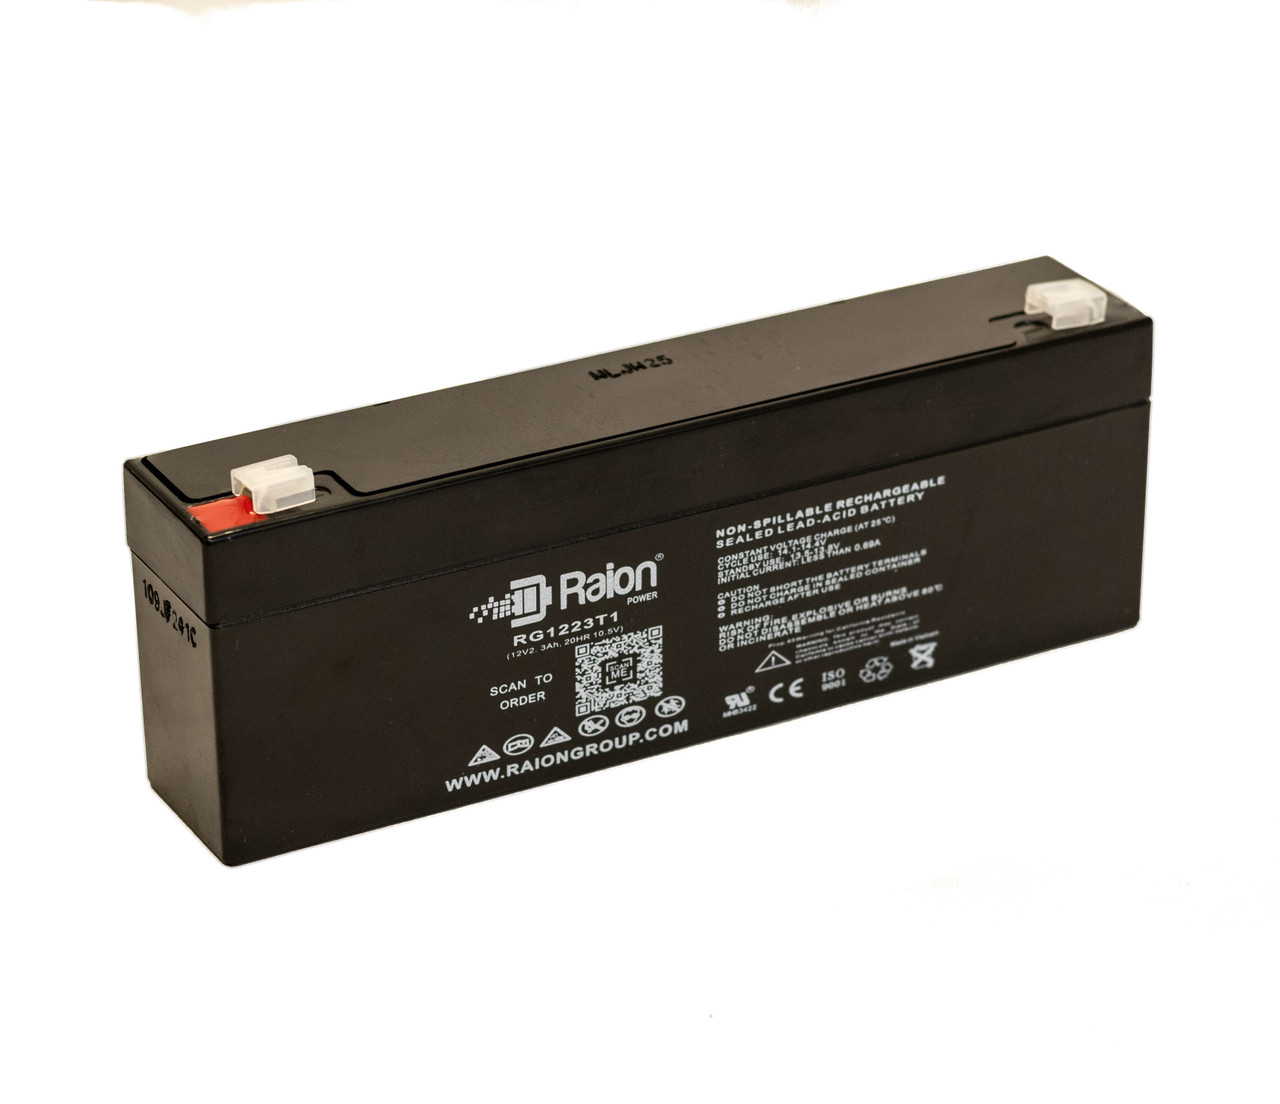 Raion Power RG1223T1 Replacement Battery for Hoyer EM01880